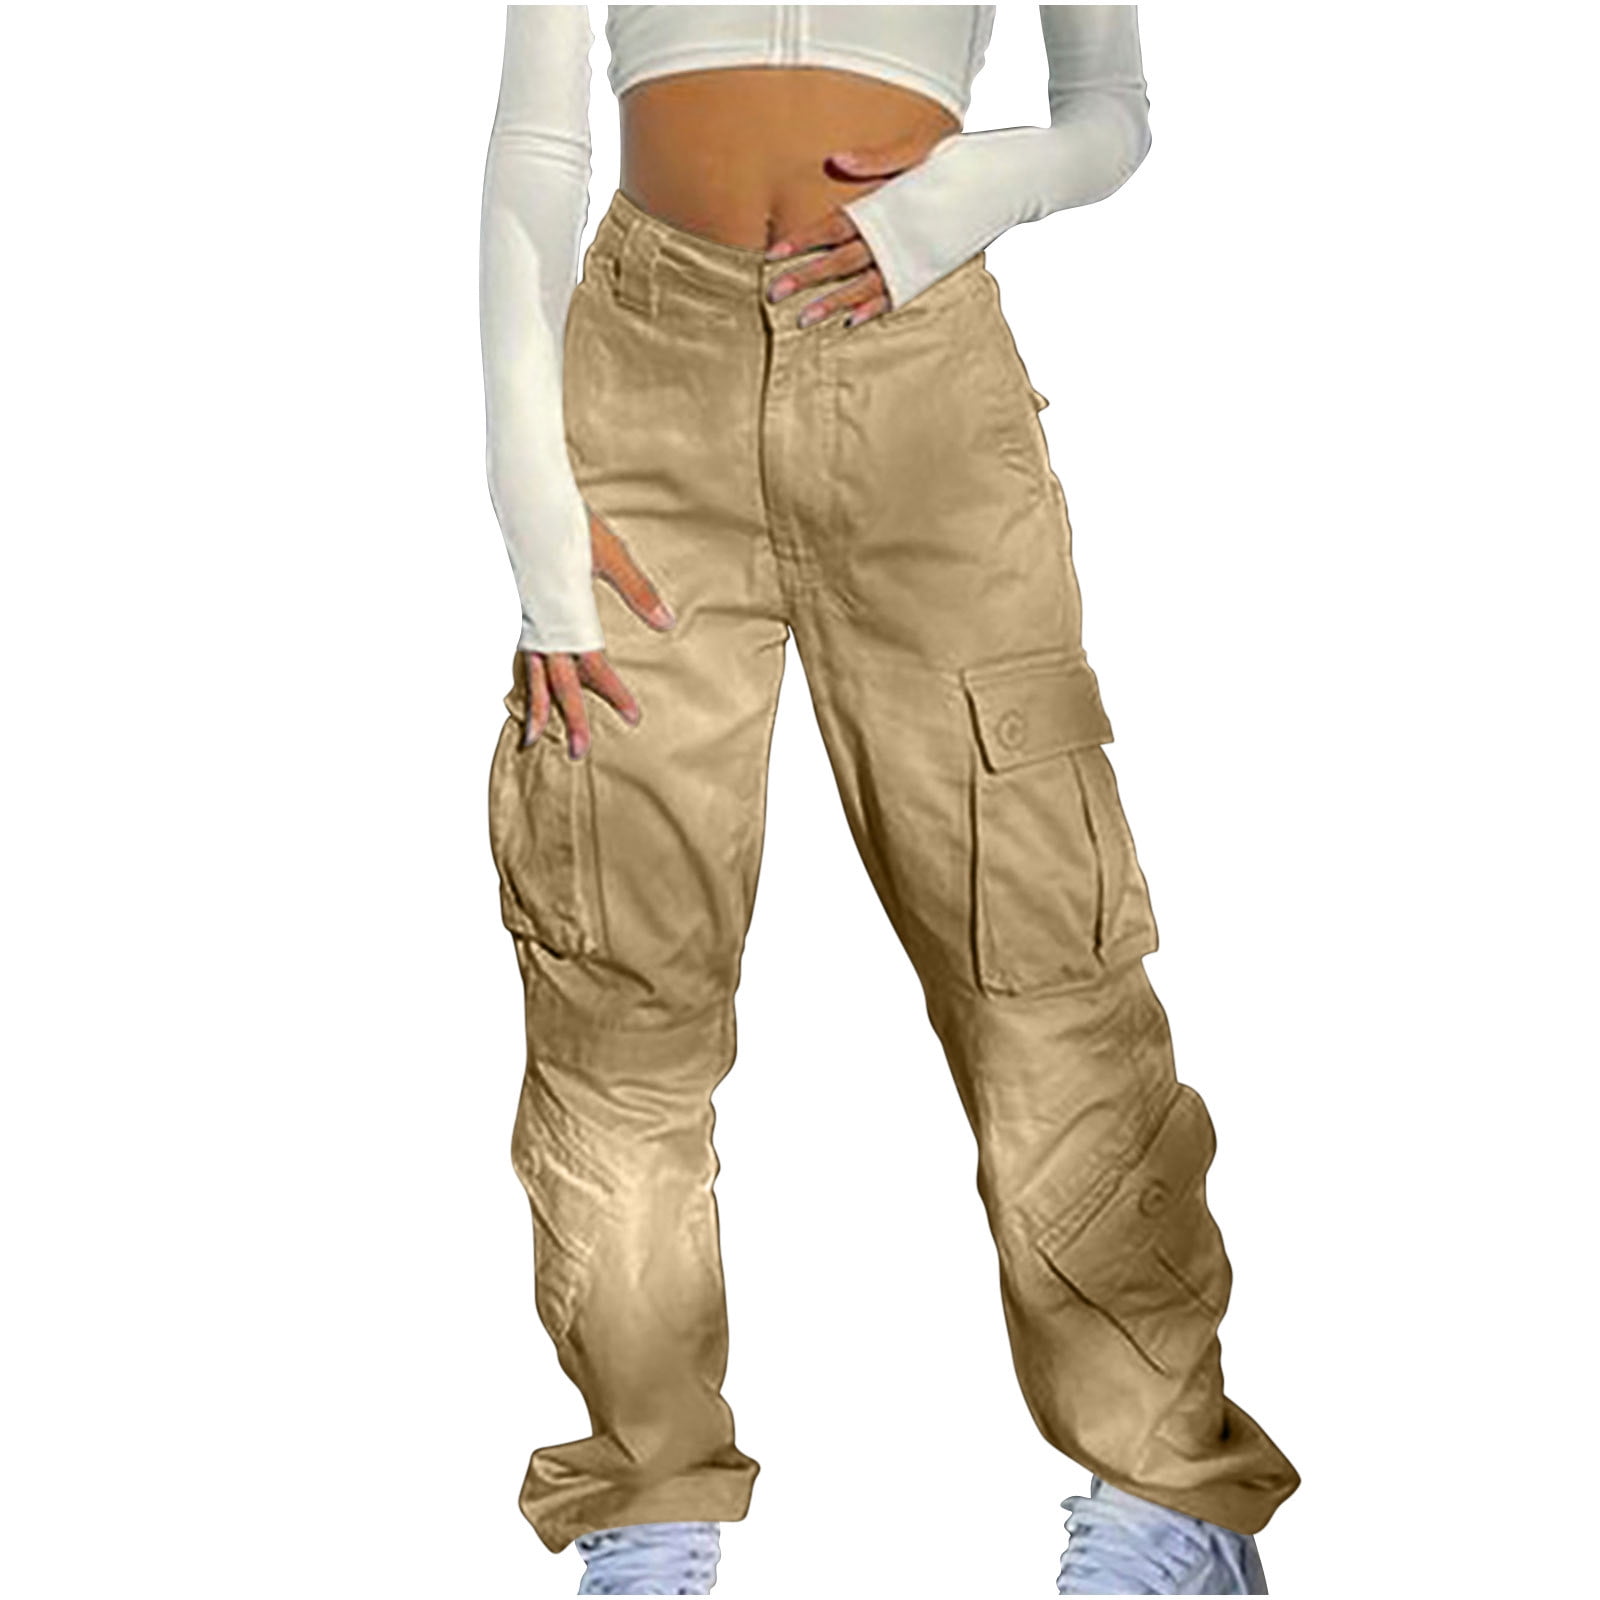 Womens Fashion Fall Deals Discount Cargo Pants for Women Solid Color Street  Style Overalls Drawstring Elastic Low Waist Sports Fashion Fall Winter